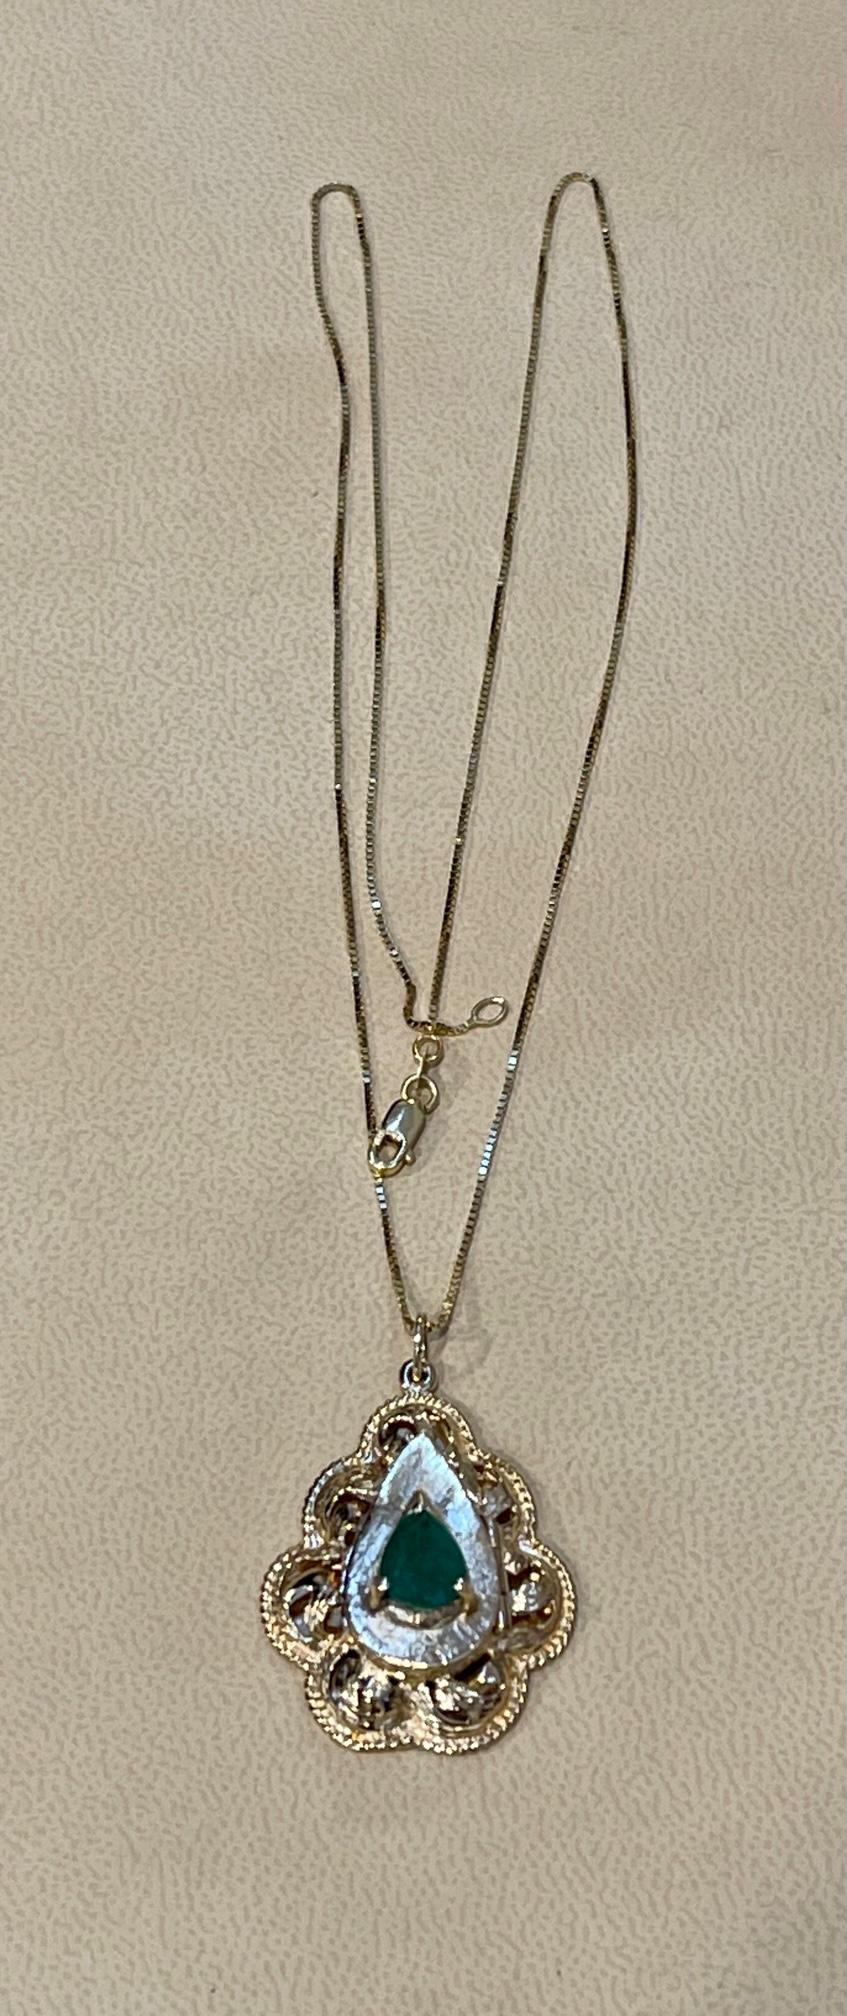 Vintage 14 Karat Yellow Gold 10.5 Gm Chain with Locket and Natural Emerald For Sale 6